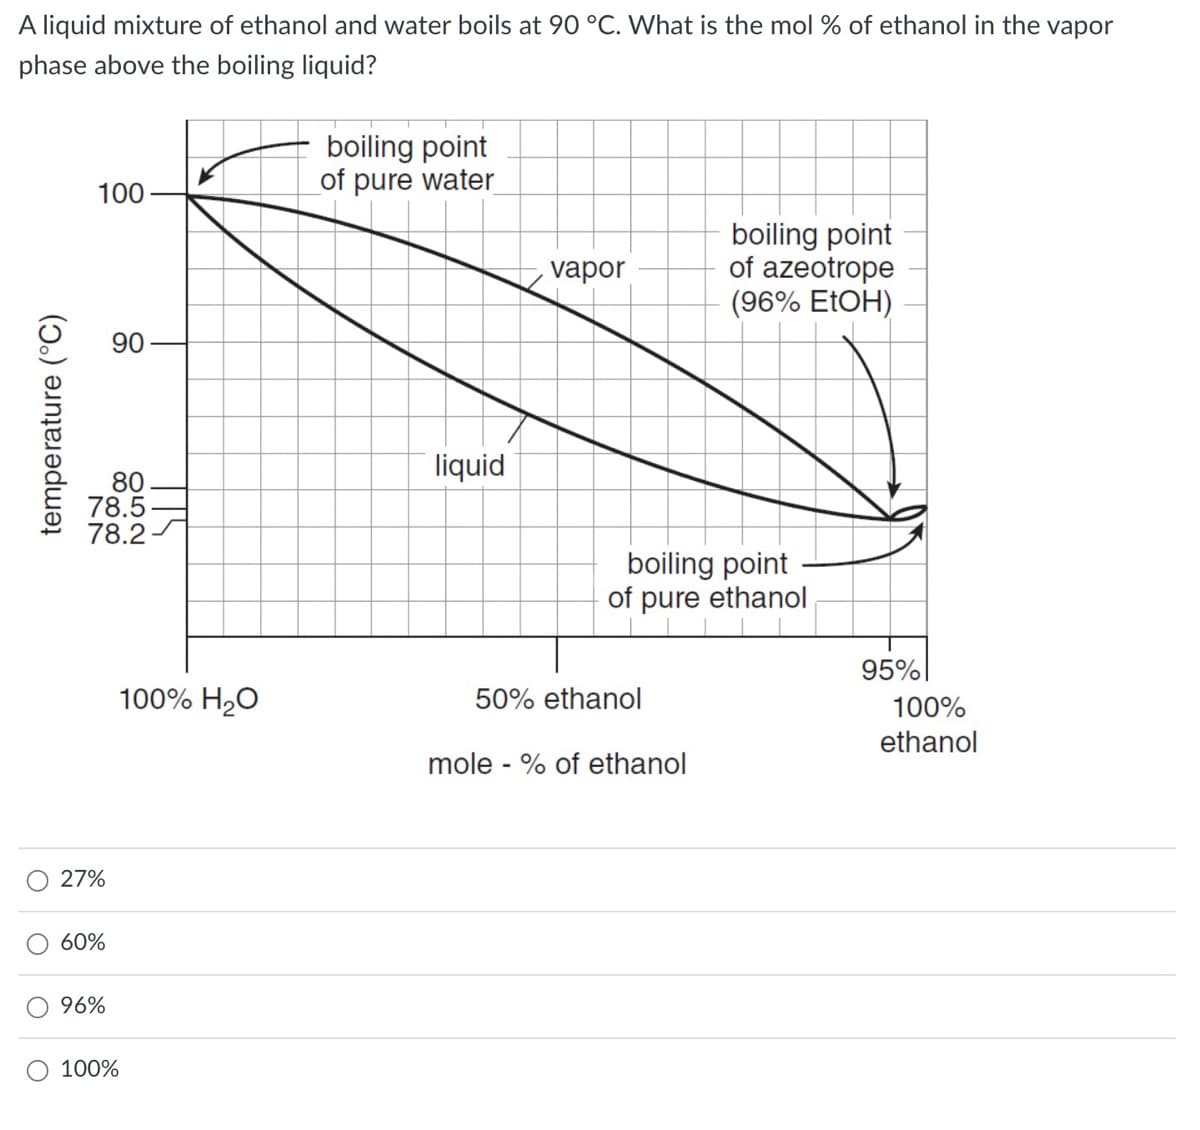 A liquid mixture of ethanol and water boils at 90 °C. What is the mol % of ethanol in the vapor
phase above the boiling liquid?
temperature (°C)
100
80
78.5-
78.2-
27%
60%
90
96%
100%
100% H₂O
boiling point
of pure water
liquid
vapor
boiling point
of azeotrope
(96% EtOH)
boiling point
of pure ethanol
50% ethanol
mole - % of ethanol
95%
100%
ethanol